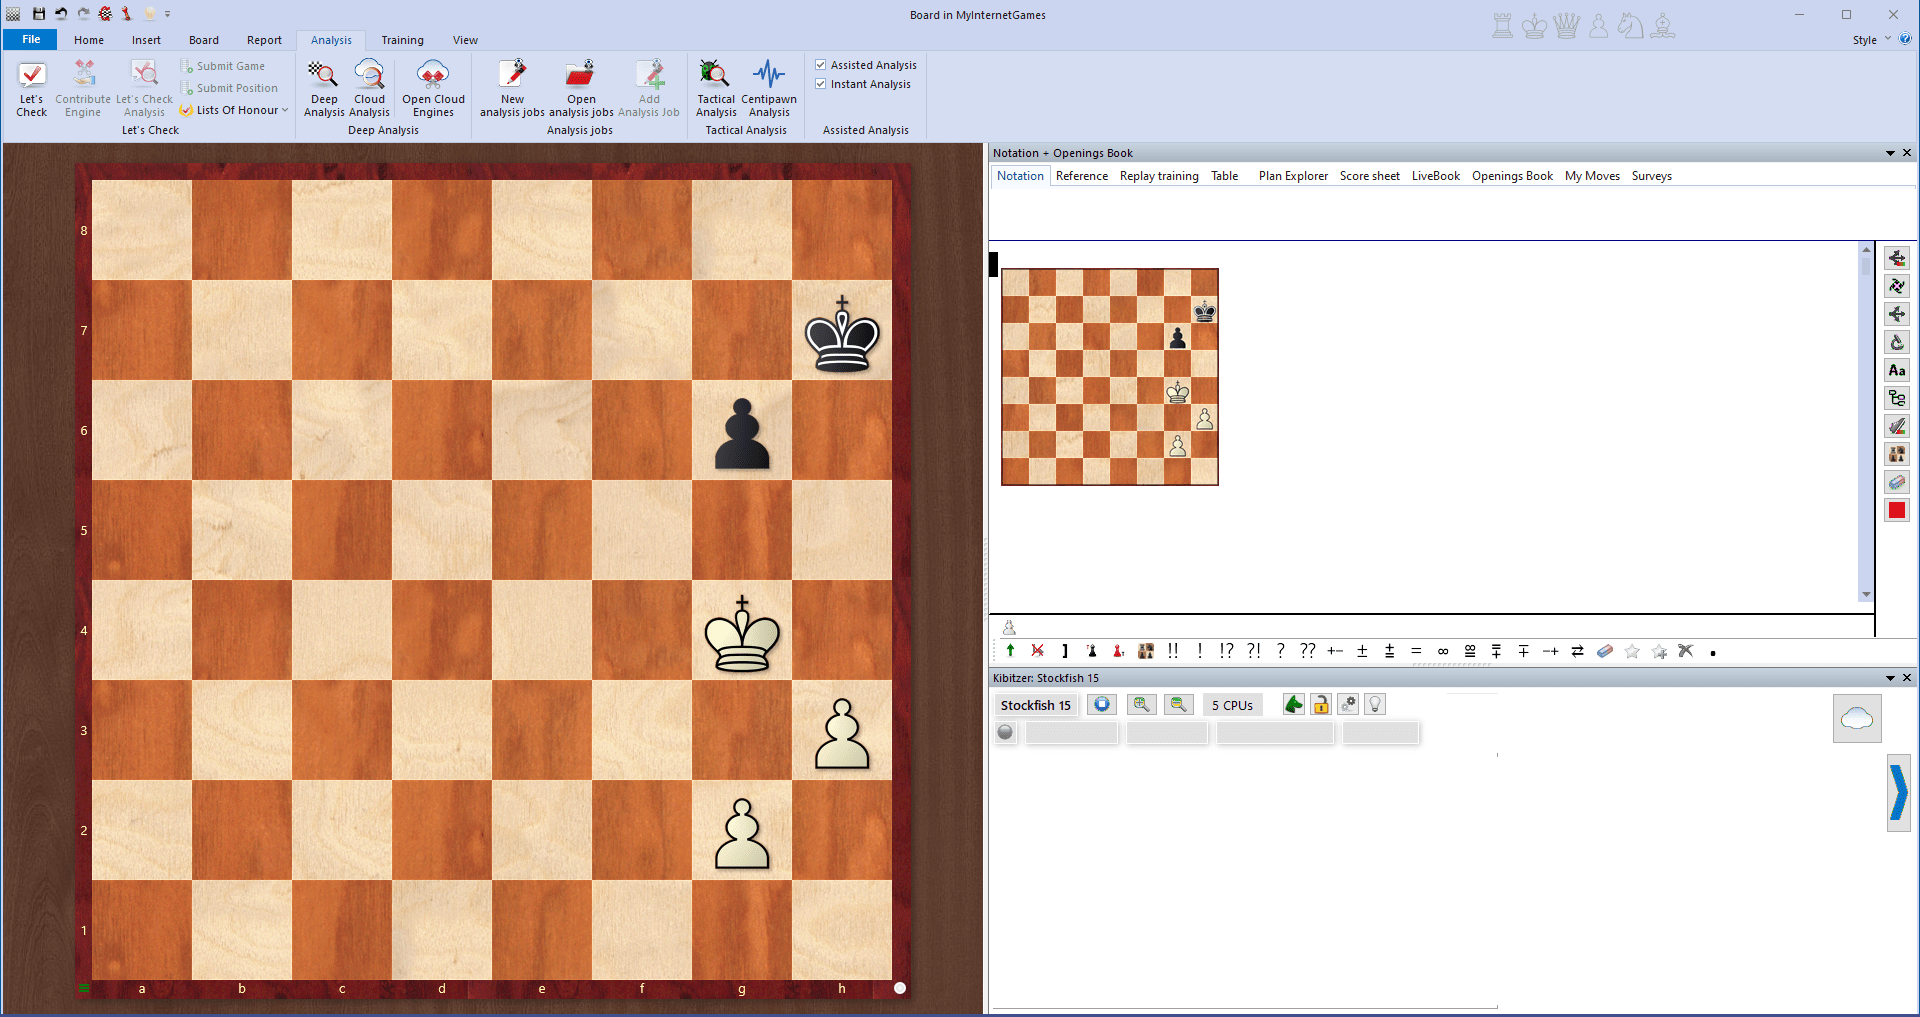 Game aborted by server - Chess Forums 